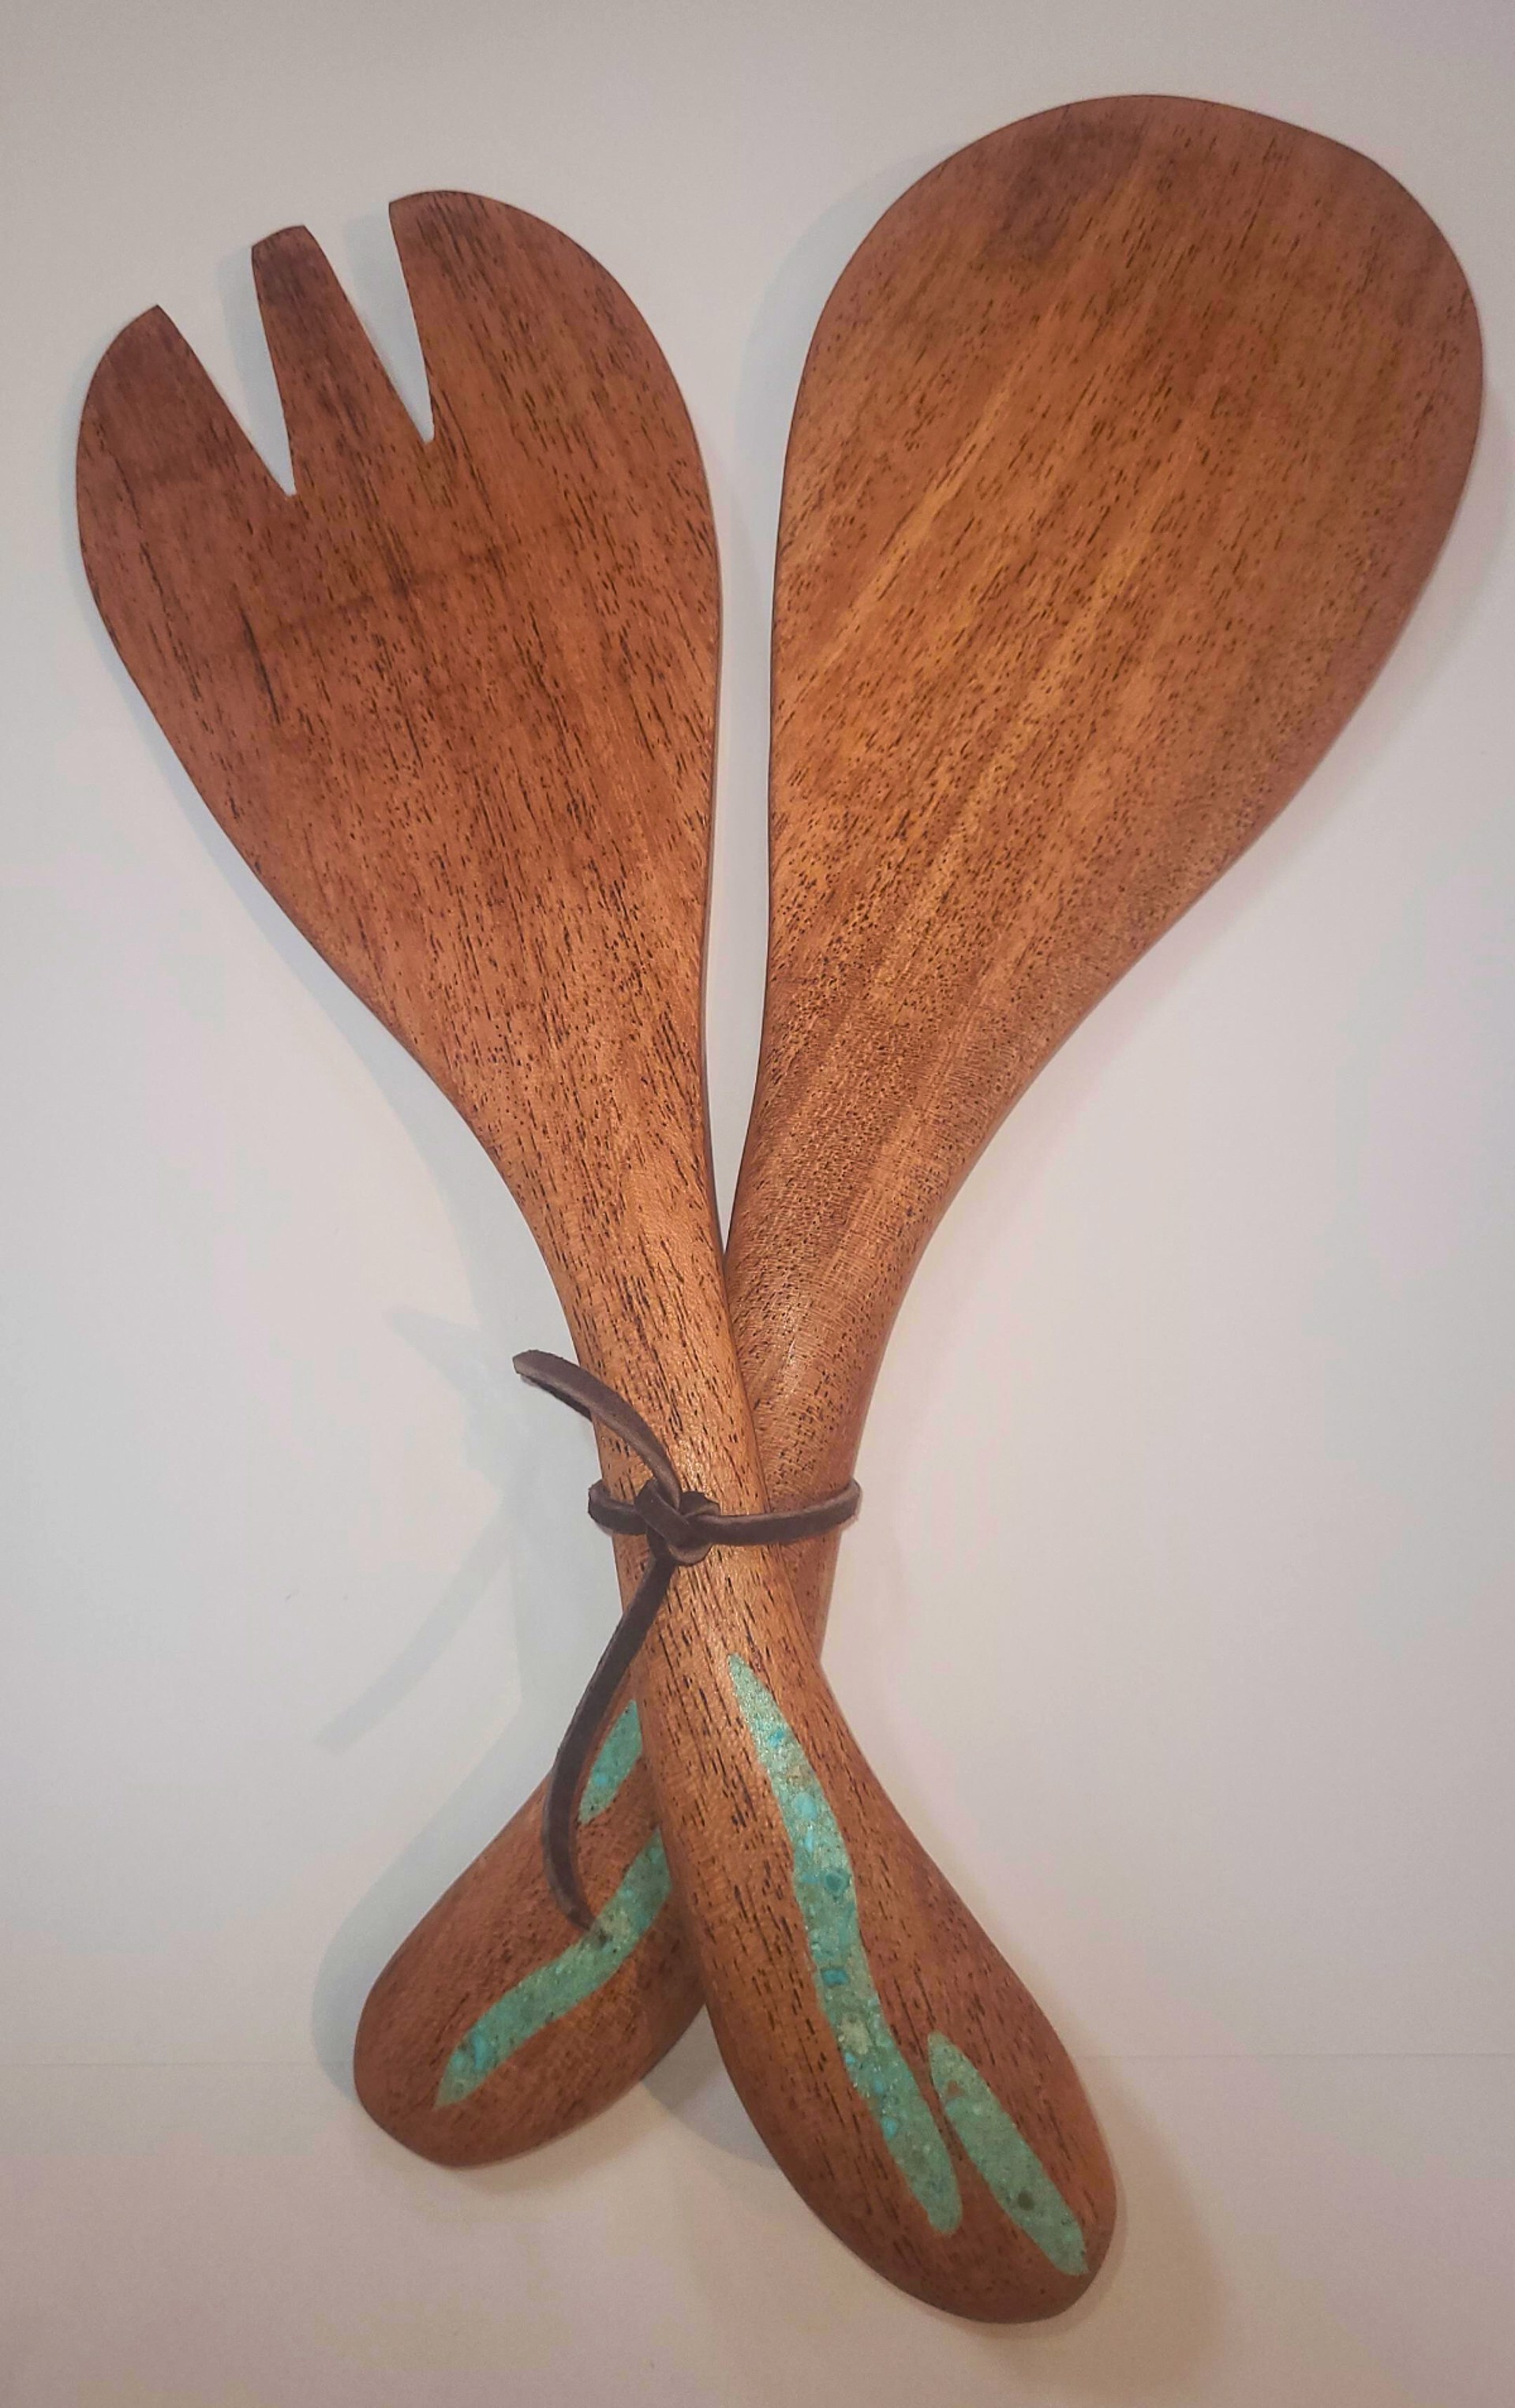 Utensils - Paddle Salad with Turquoise Inlay by TreeStump Woodcraft